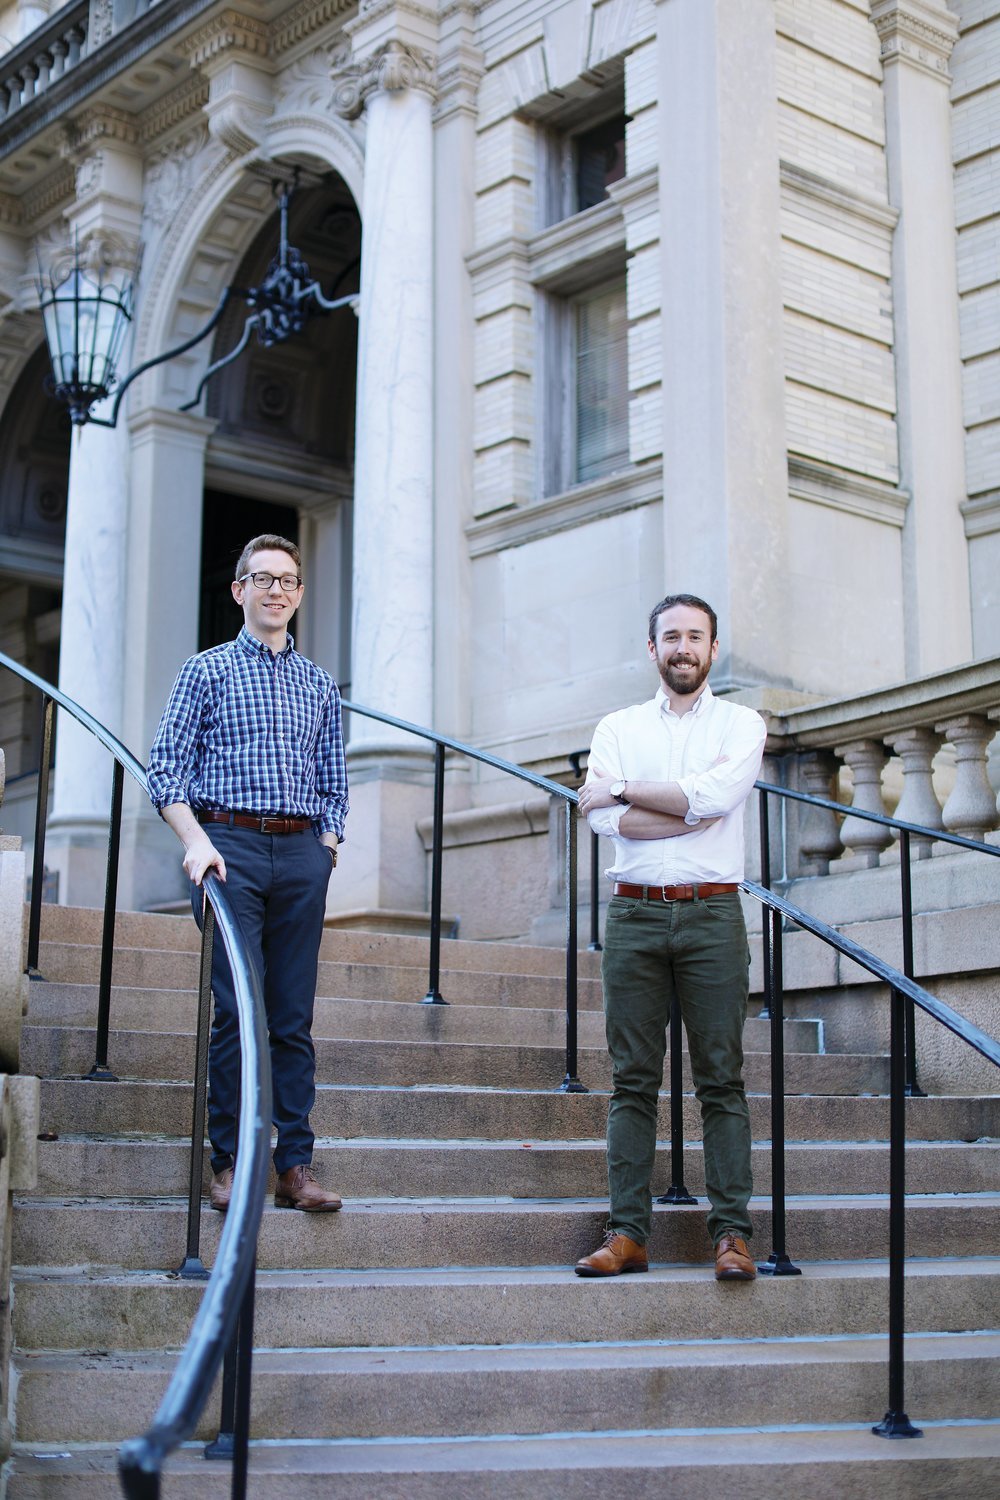 John Clarke, 28, left, and Scott Thompson, 28, run the Catholic publishing firm Cluny Media. The two Providence College alums and parishioners of St. Pius V Church, are dedicated to re-publishing books in the Catholic literary and intellectual traditions that have fallen out-of-print with the large publishers.